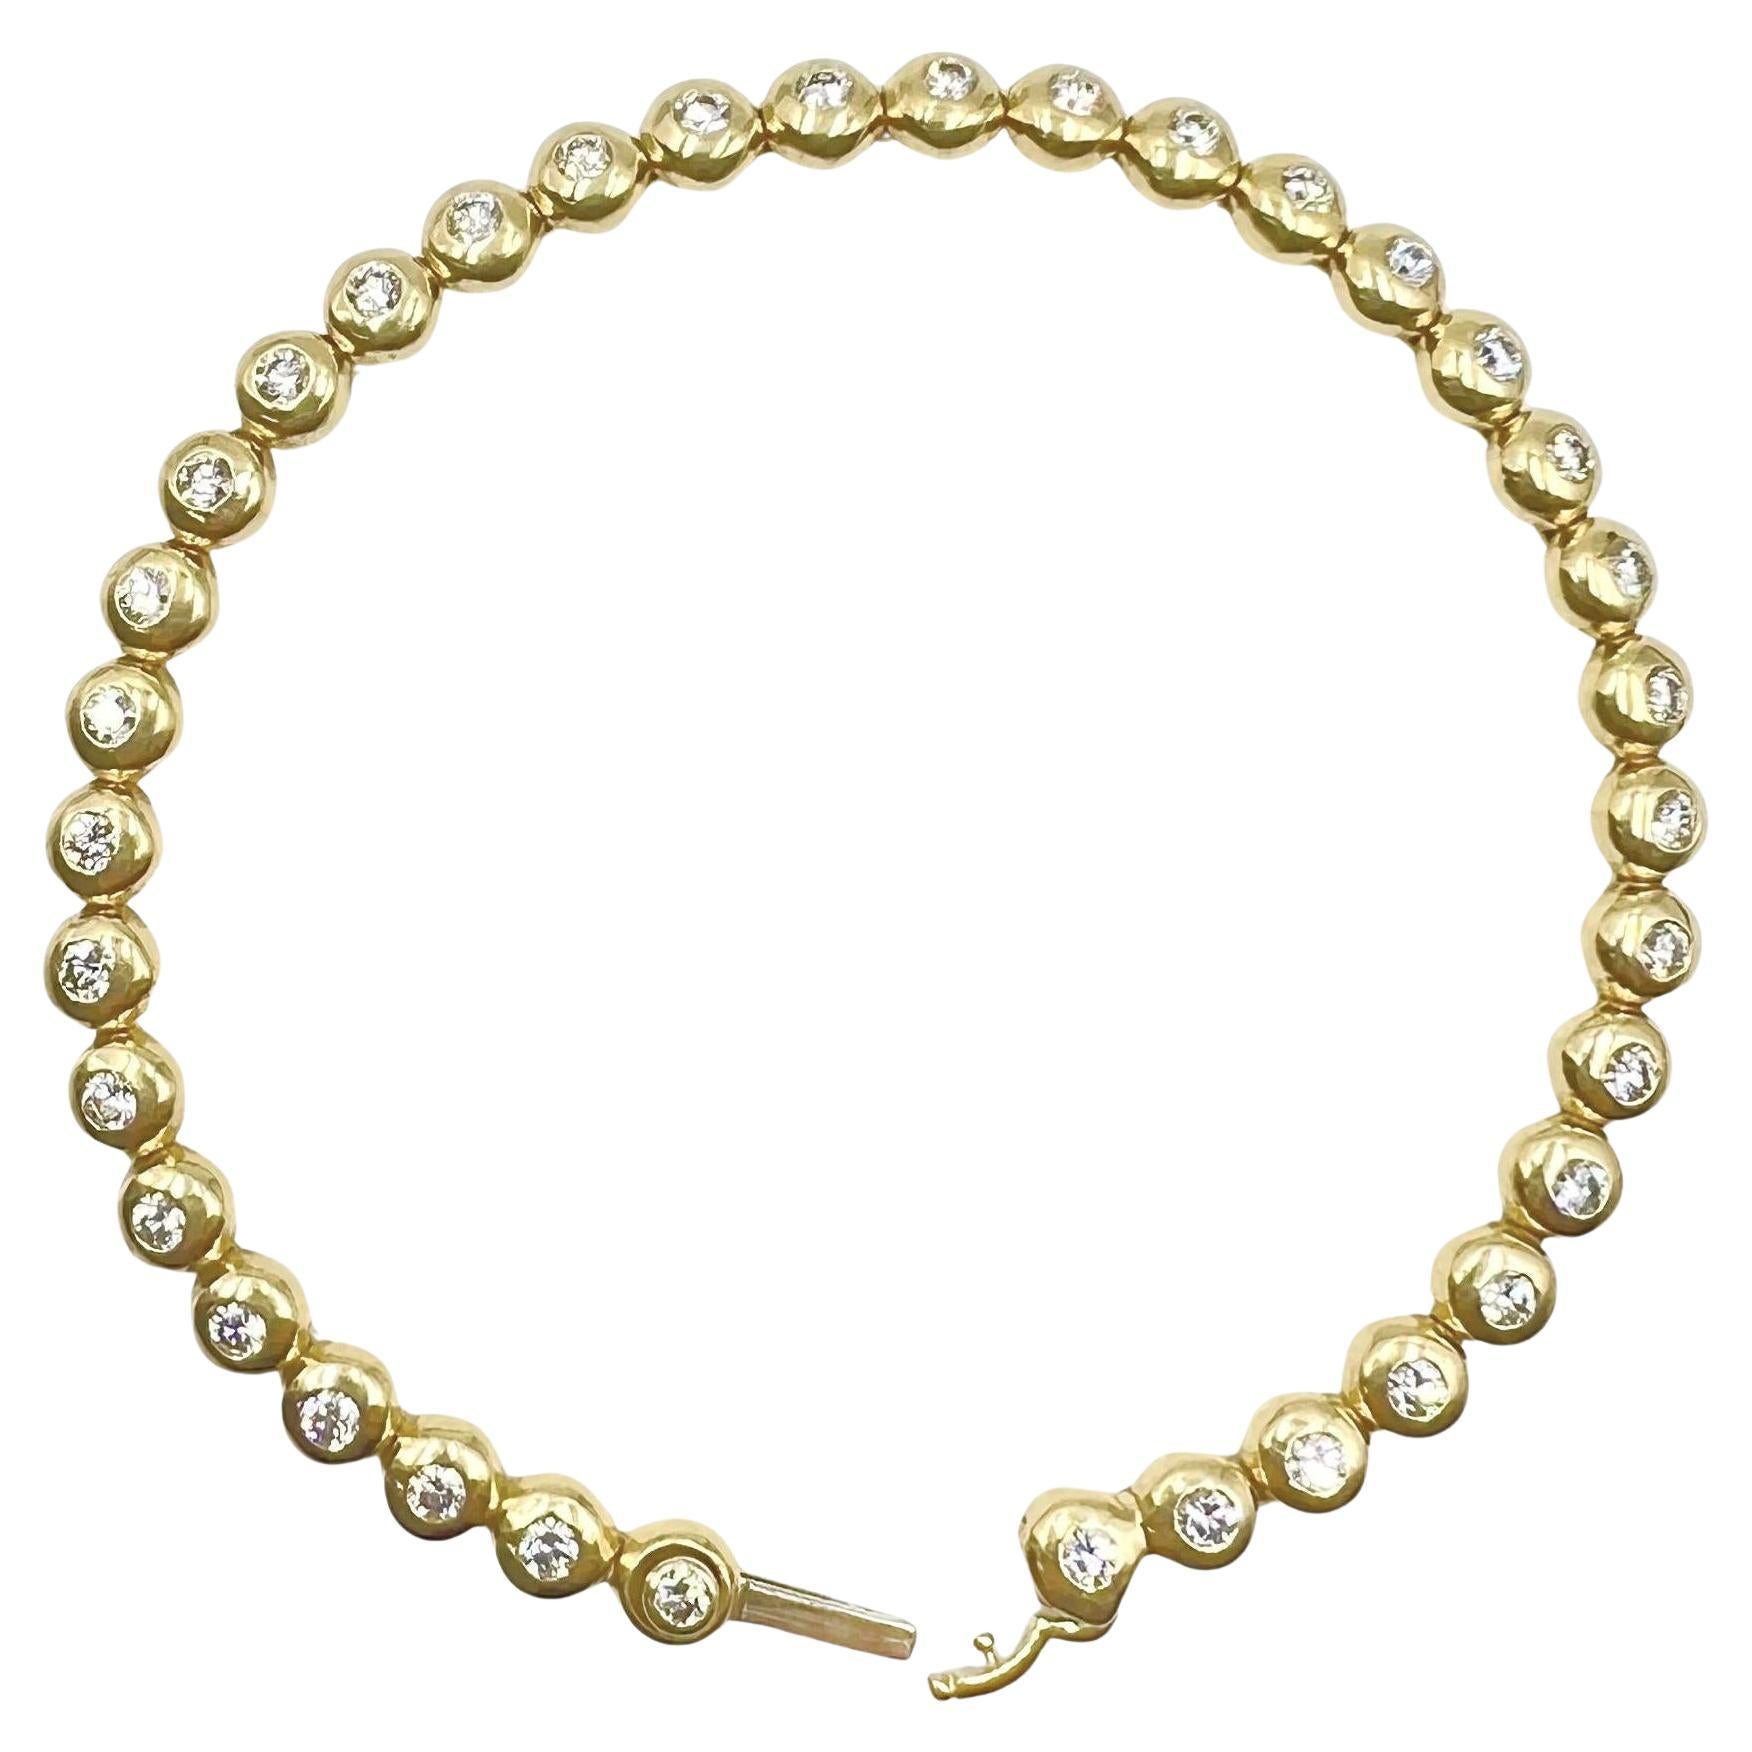 Tiffany & Co. 18k yellow gold diamond line bracelet.  Polished gold bezel links set with thirty-six round brilliant-cut diamonds weighing approximately 1.80 total carats (E-G color, VVS-VS clarity).  Hidden clasp with additional safety latch. 